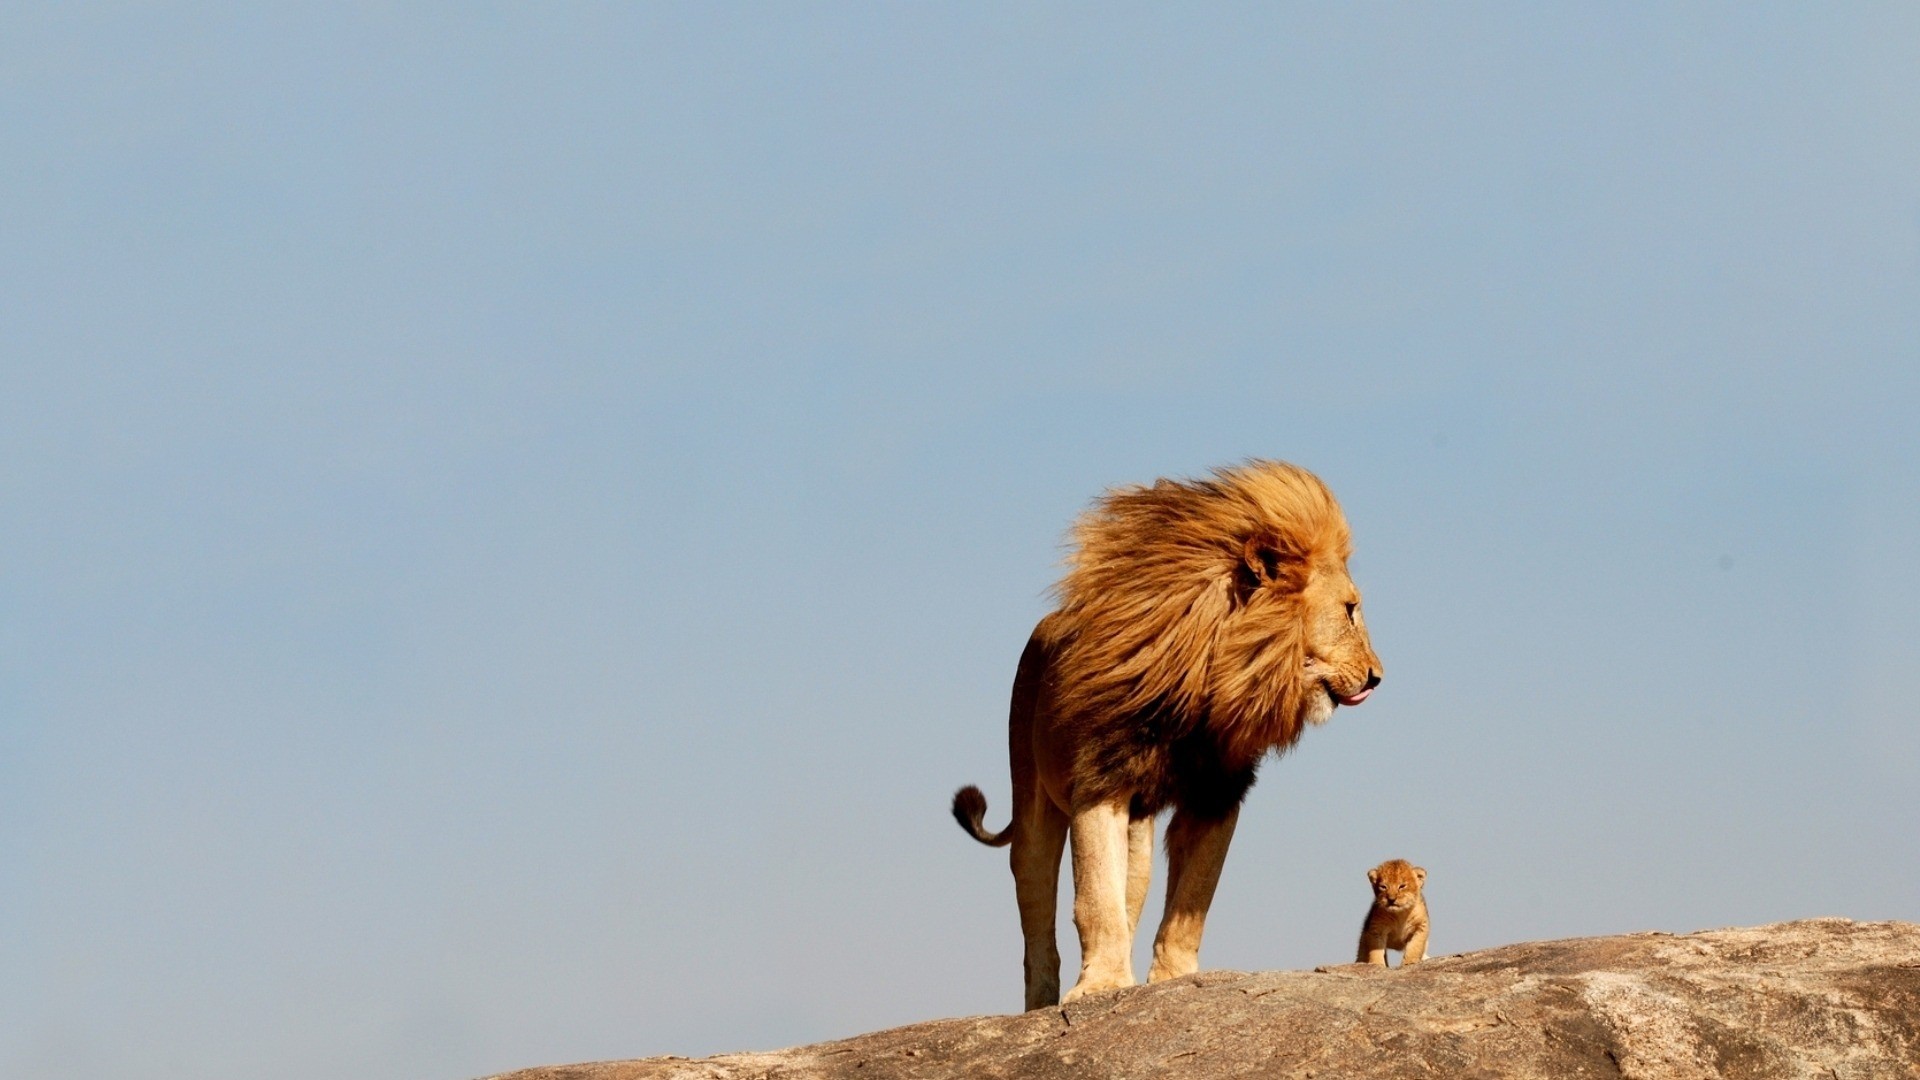 animals, Cubs, Lions, Baby, Animals Wallpaper